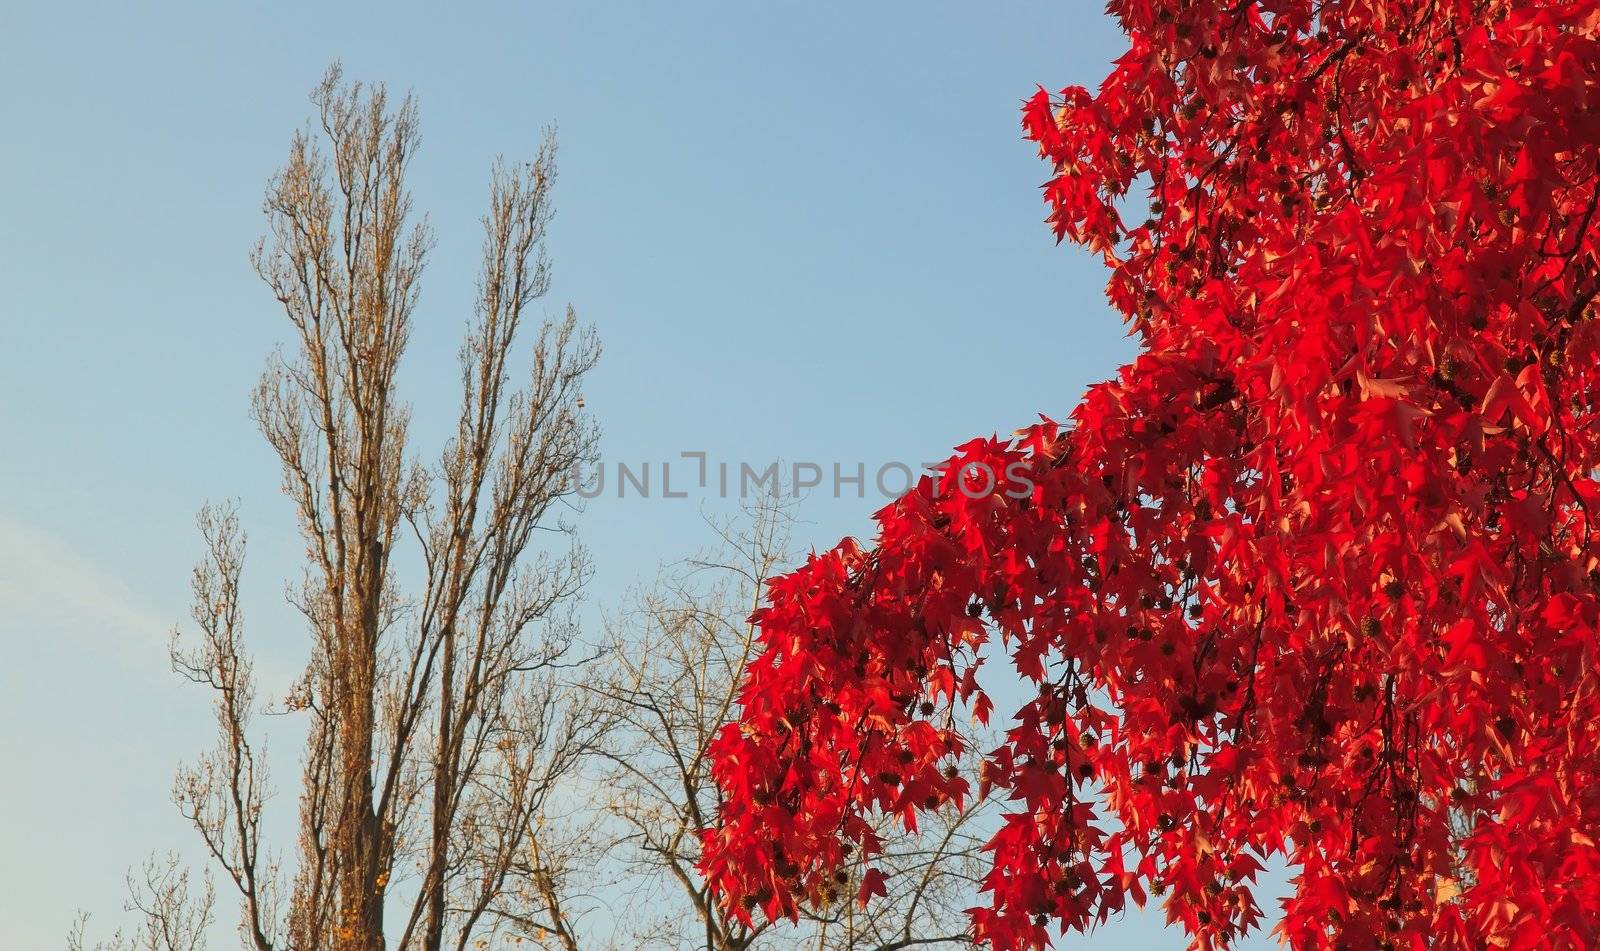 opposition: red maple with his leaves flambloyant and poplar bare in autumn